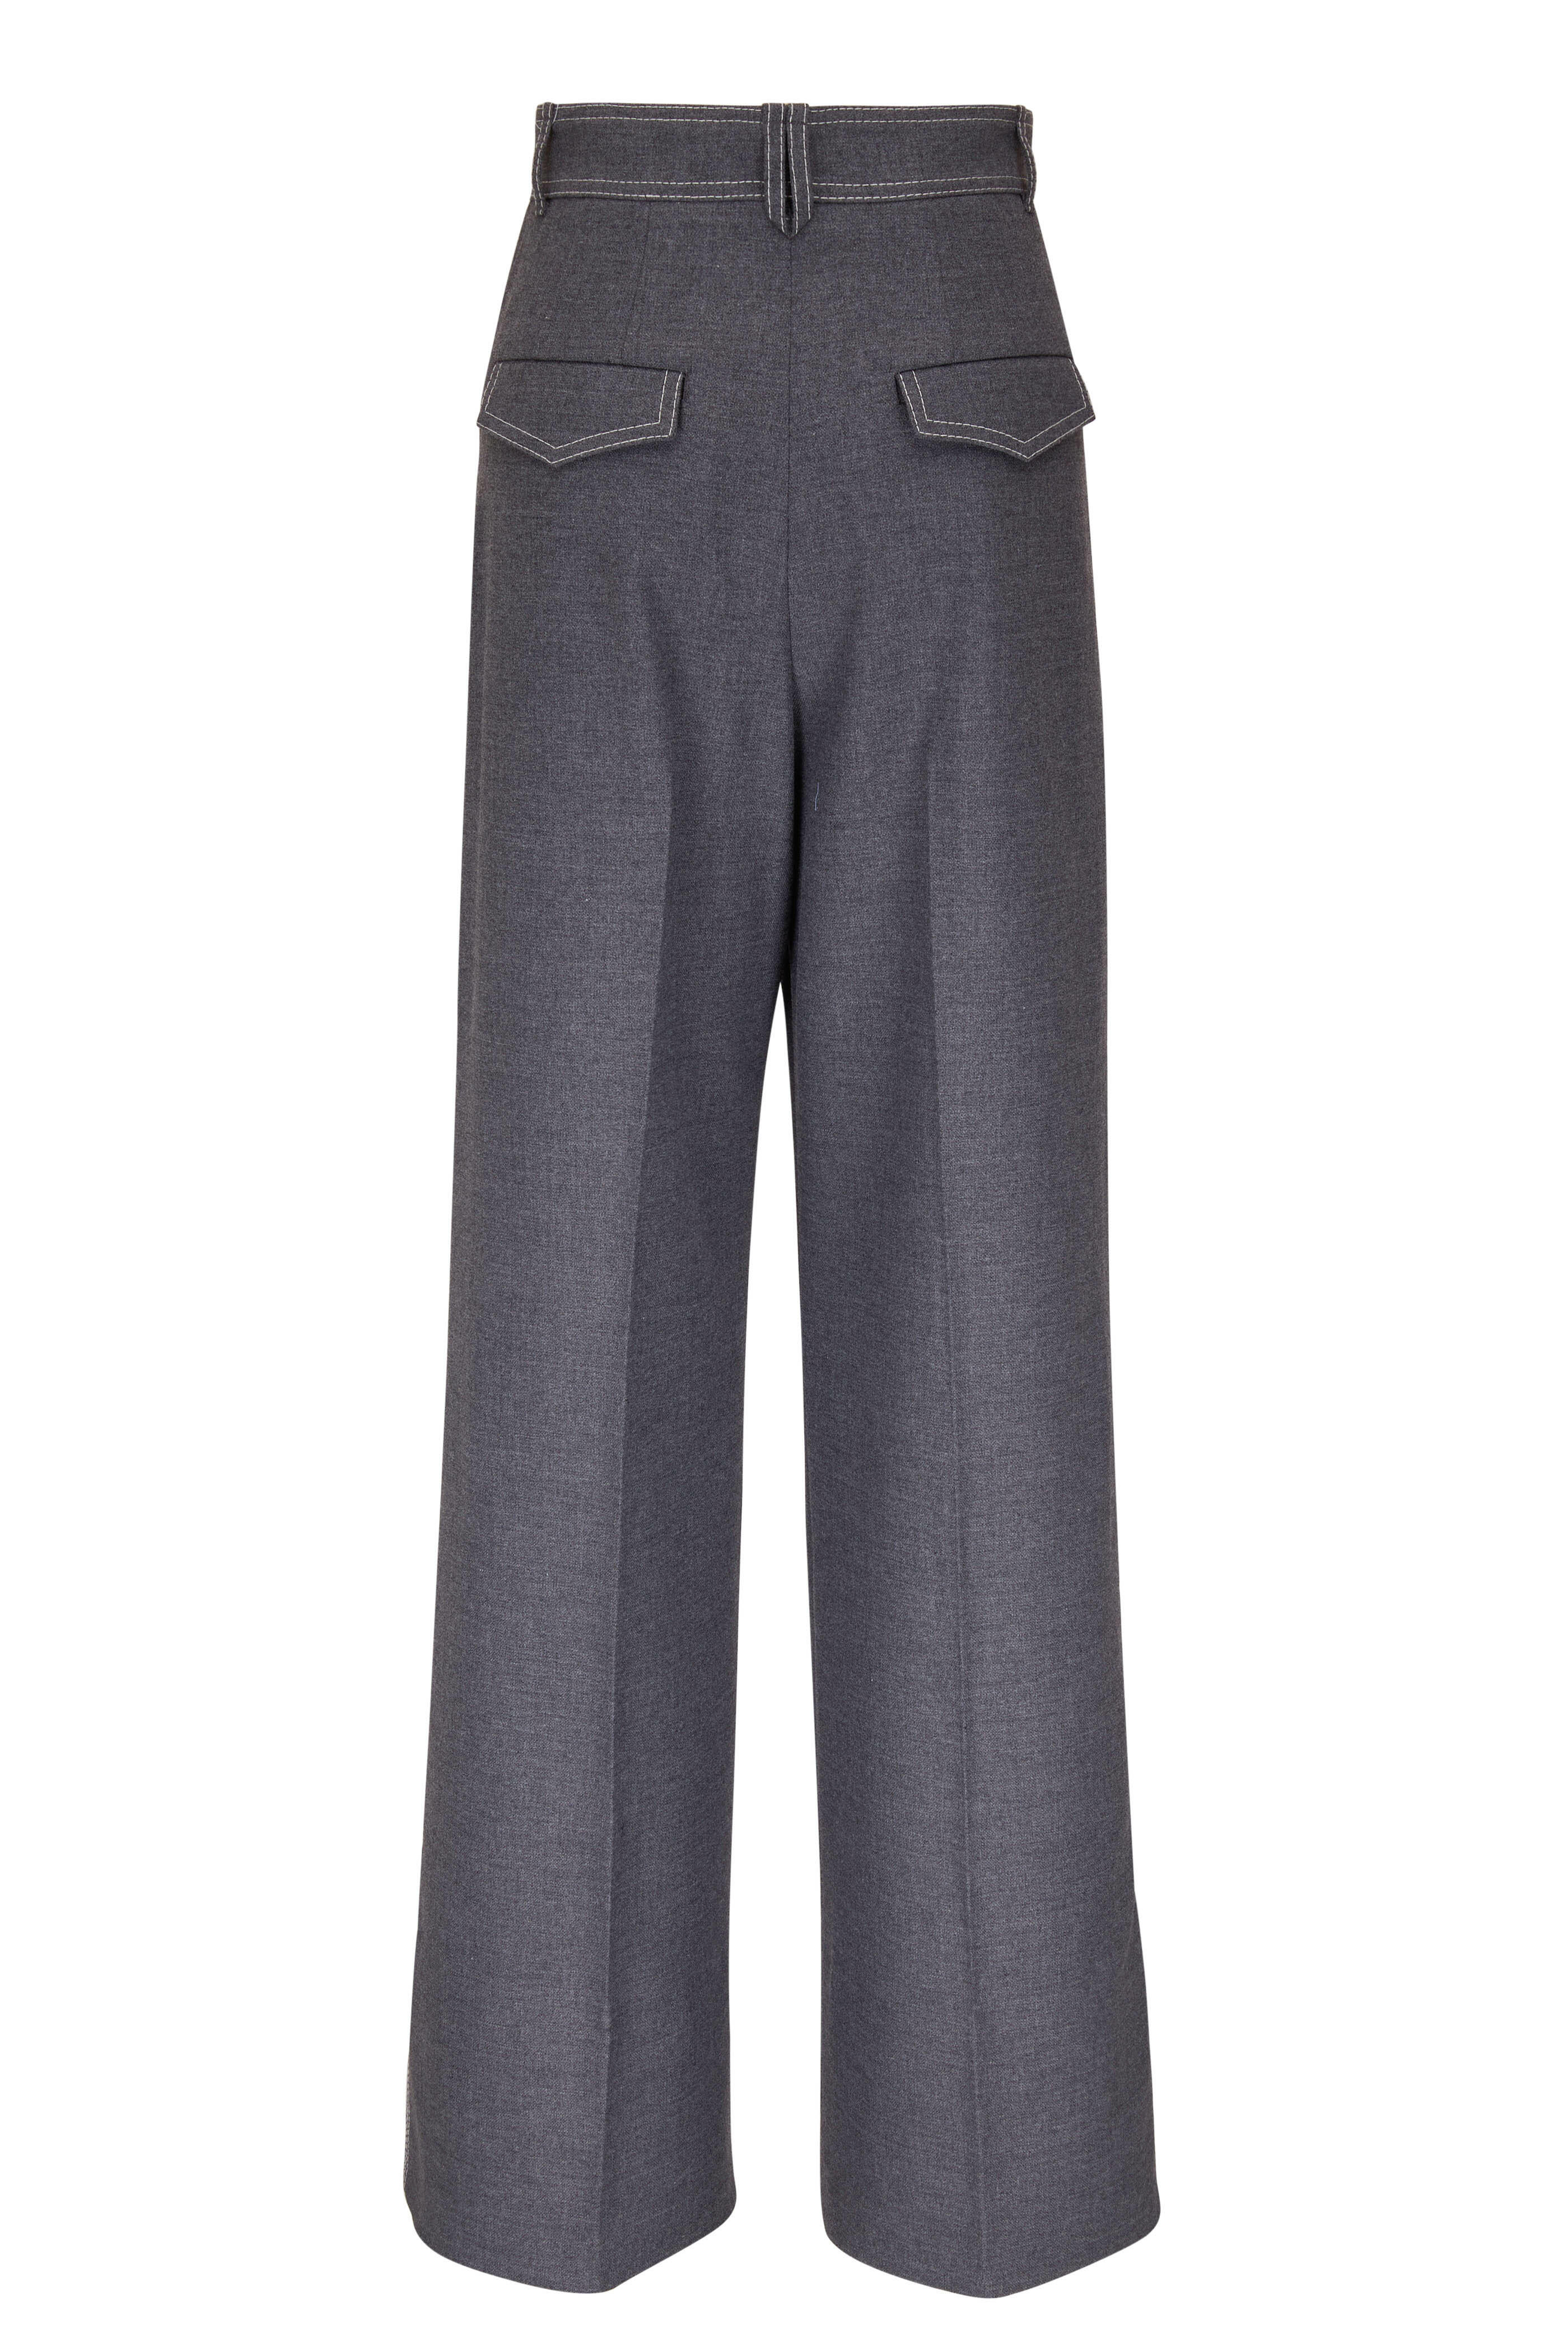 Dorothee Schumacher - Casual Attraction Charcoal Gray Pant